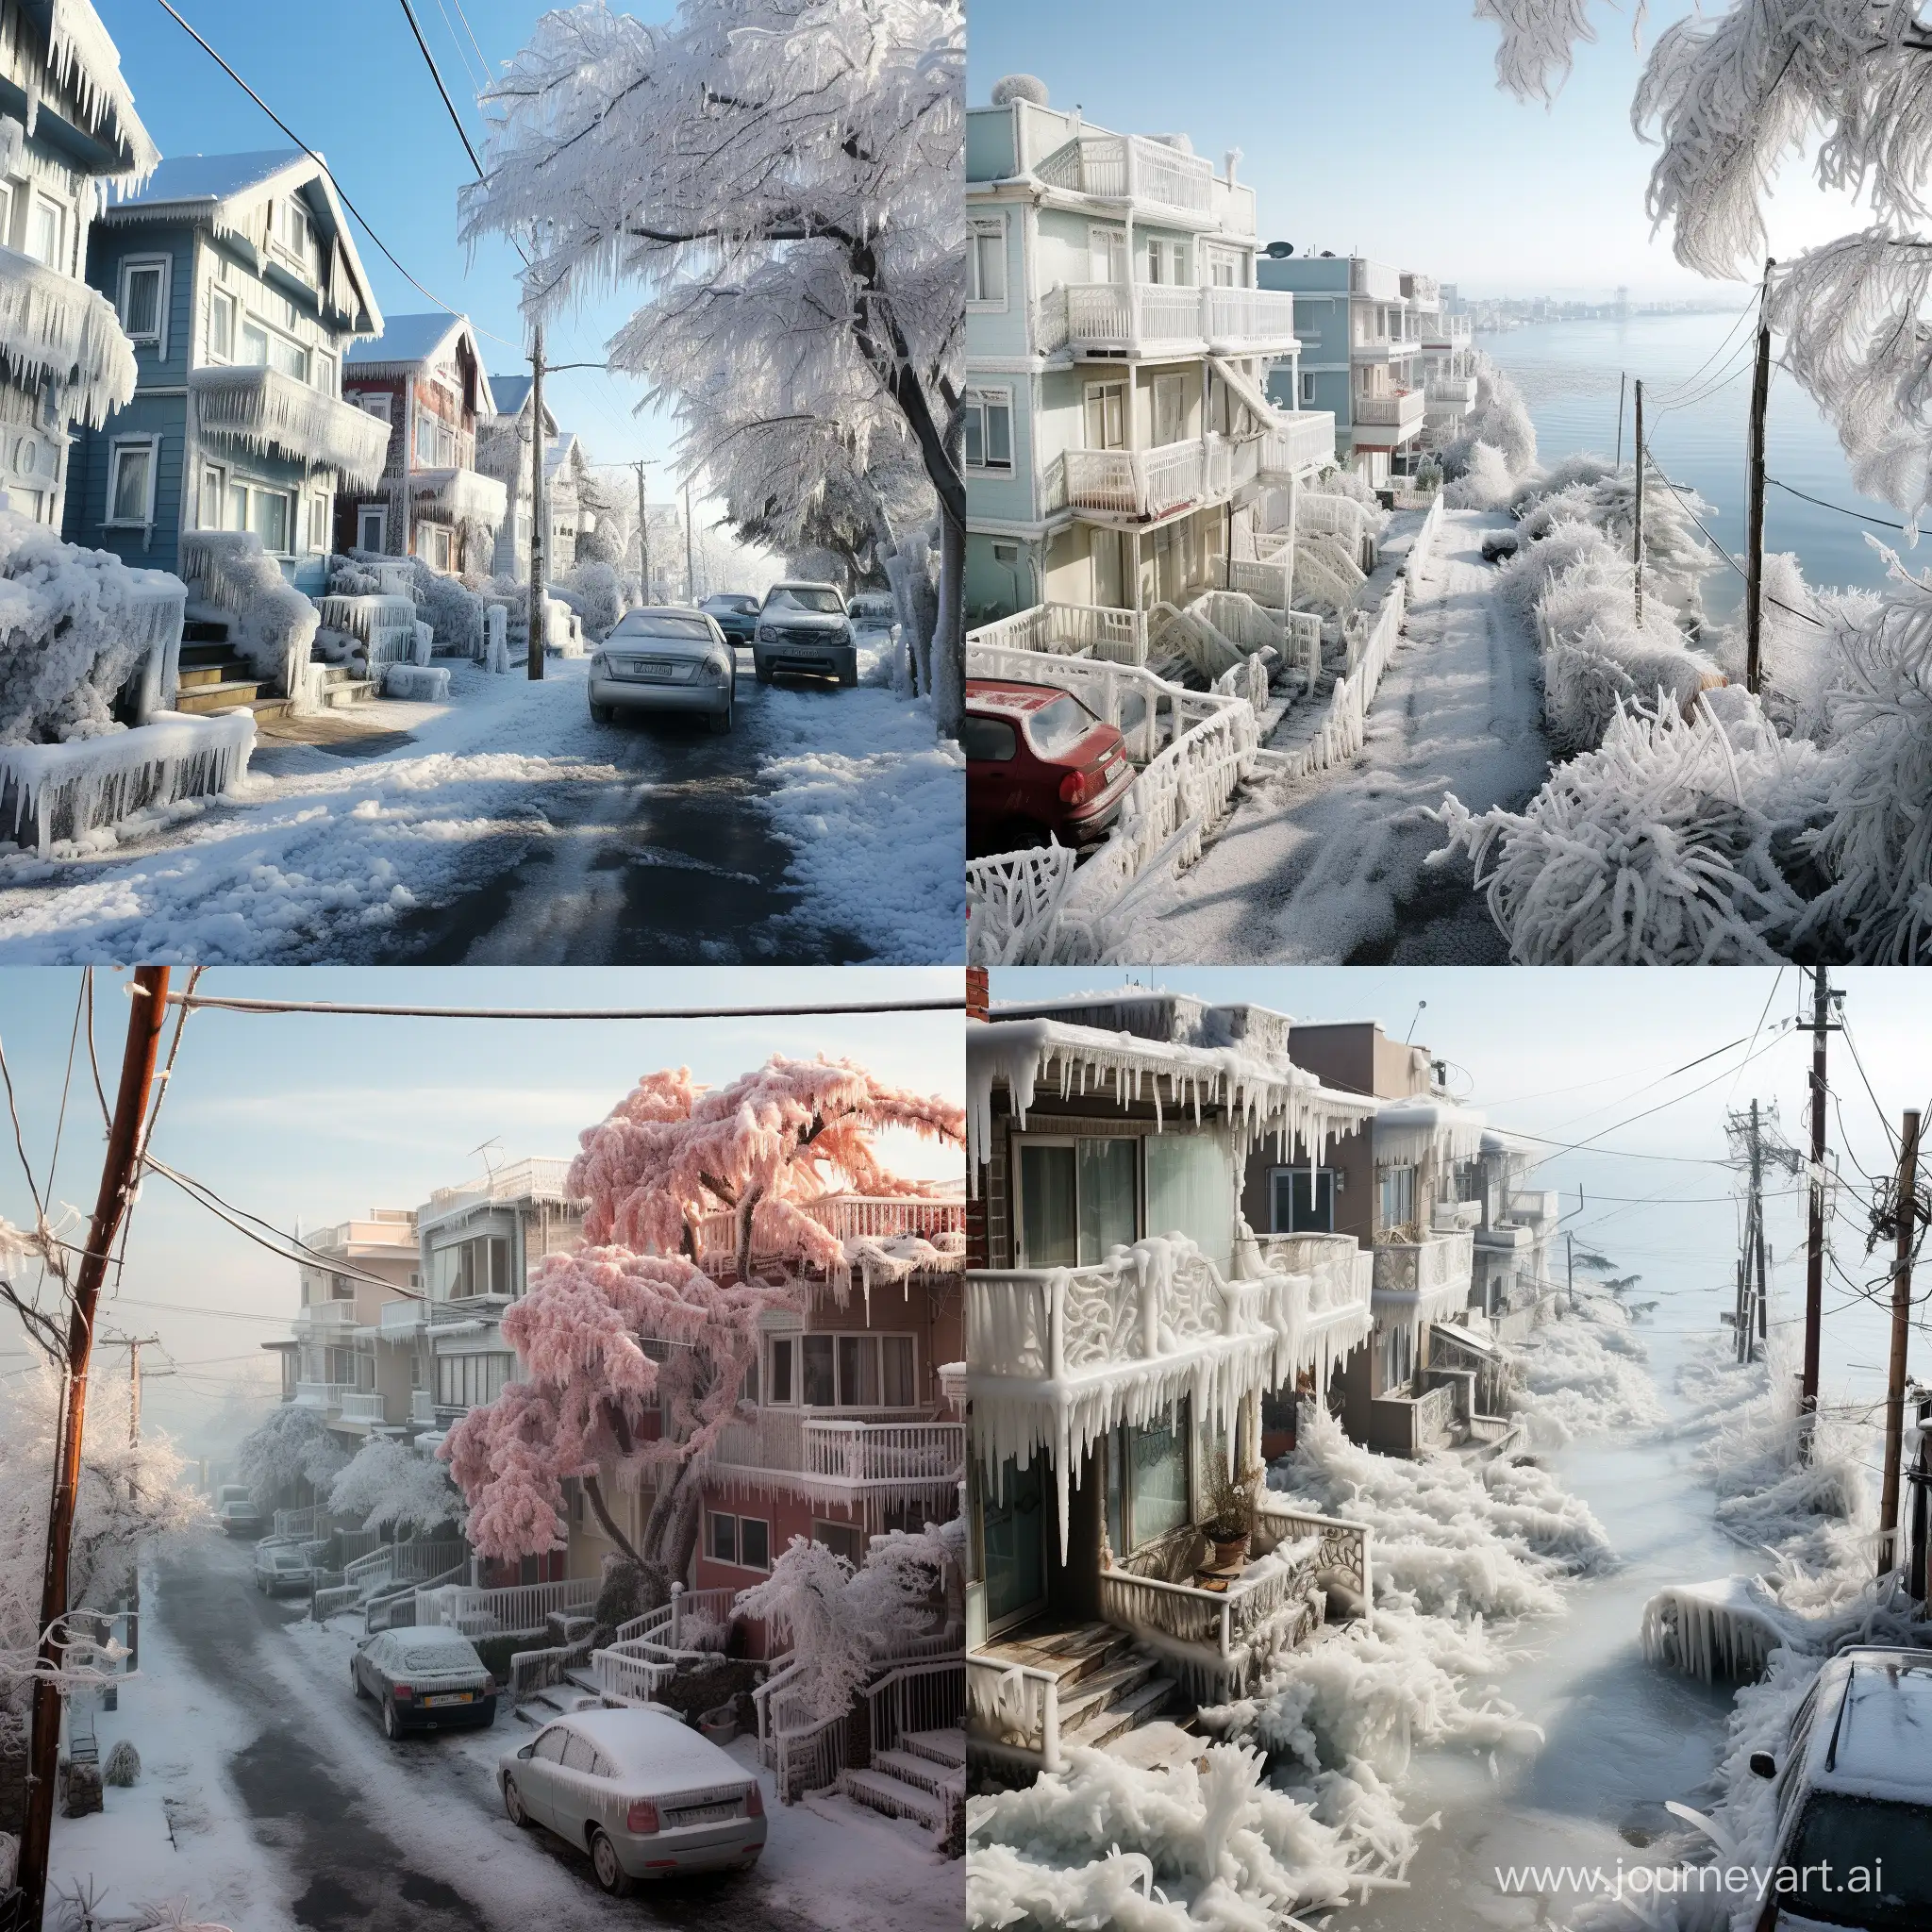 Winter-Wonderland-in-Istanbul-Maltepe-Icy-Streets-SnowCovered-Cars-and-Frosty-Homes